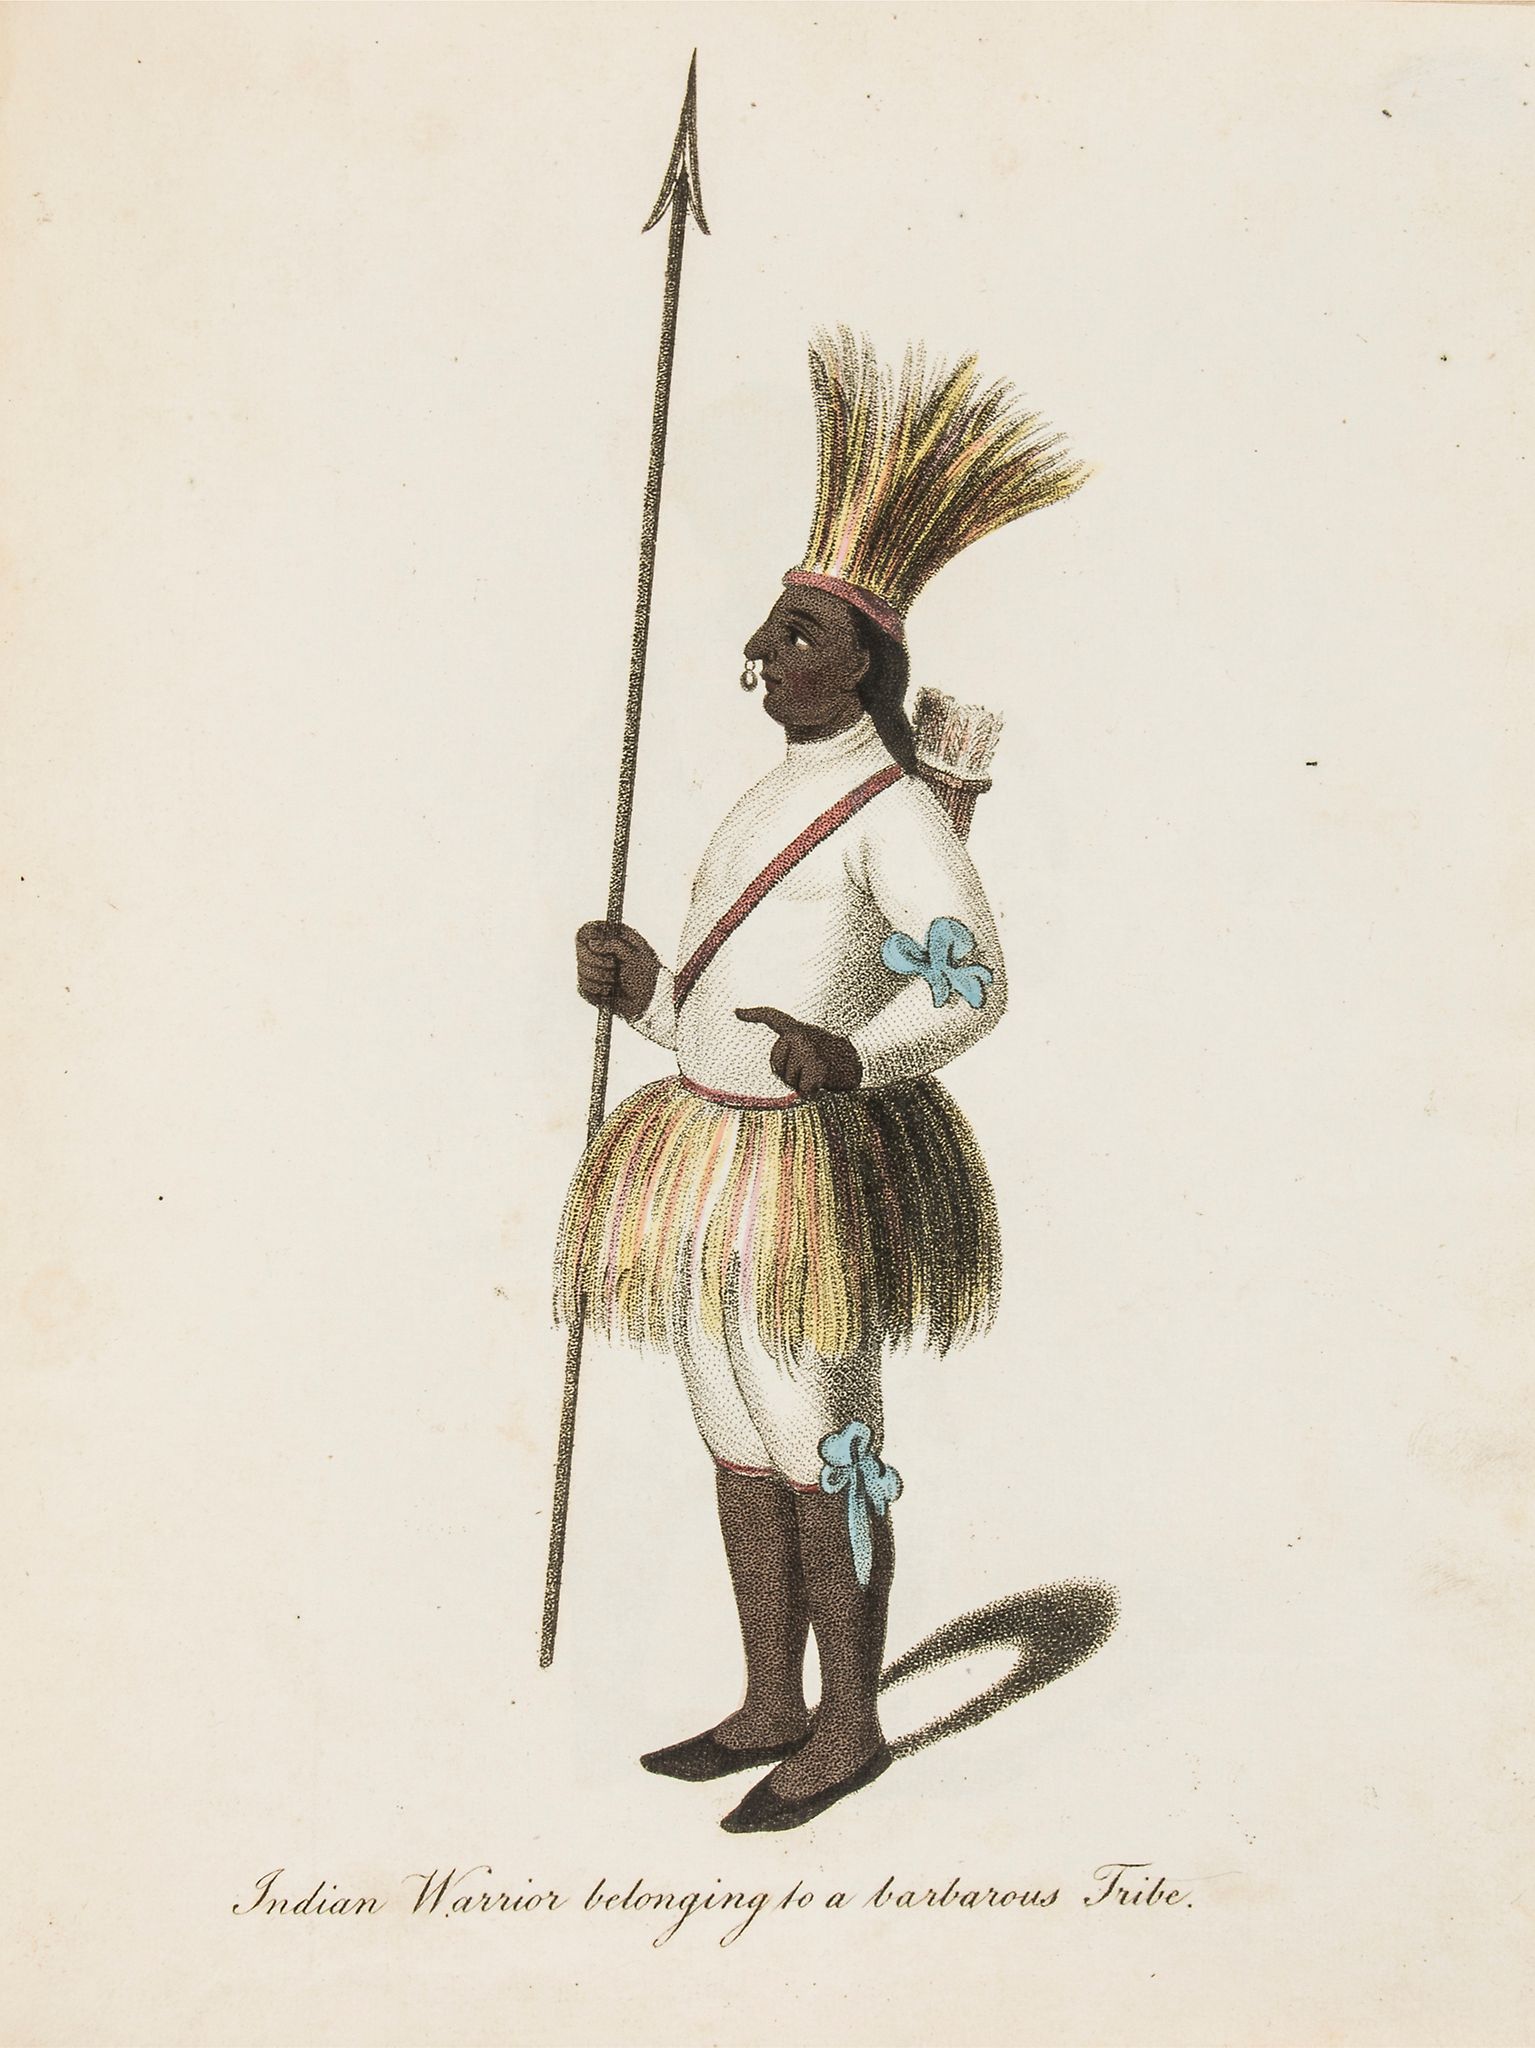 South America.- Peru.- - The Costume of the Inhabitants of Peru, no text, 19 hand-coloured stipple-